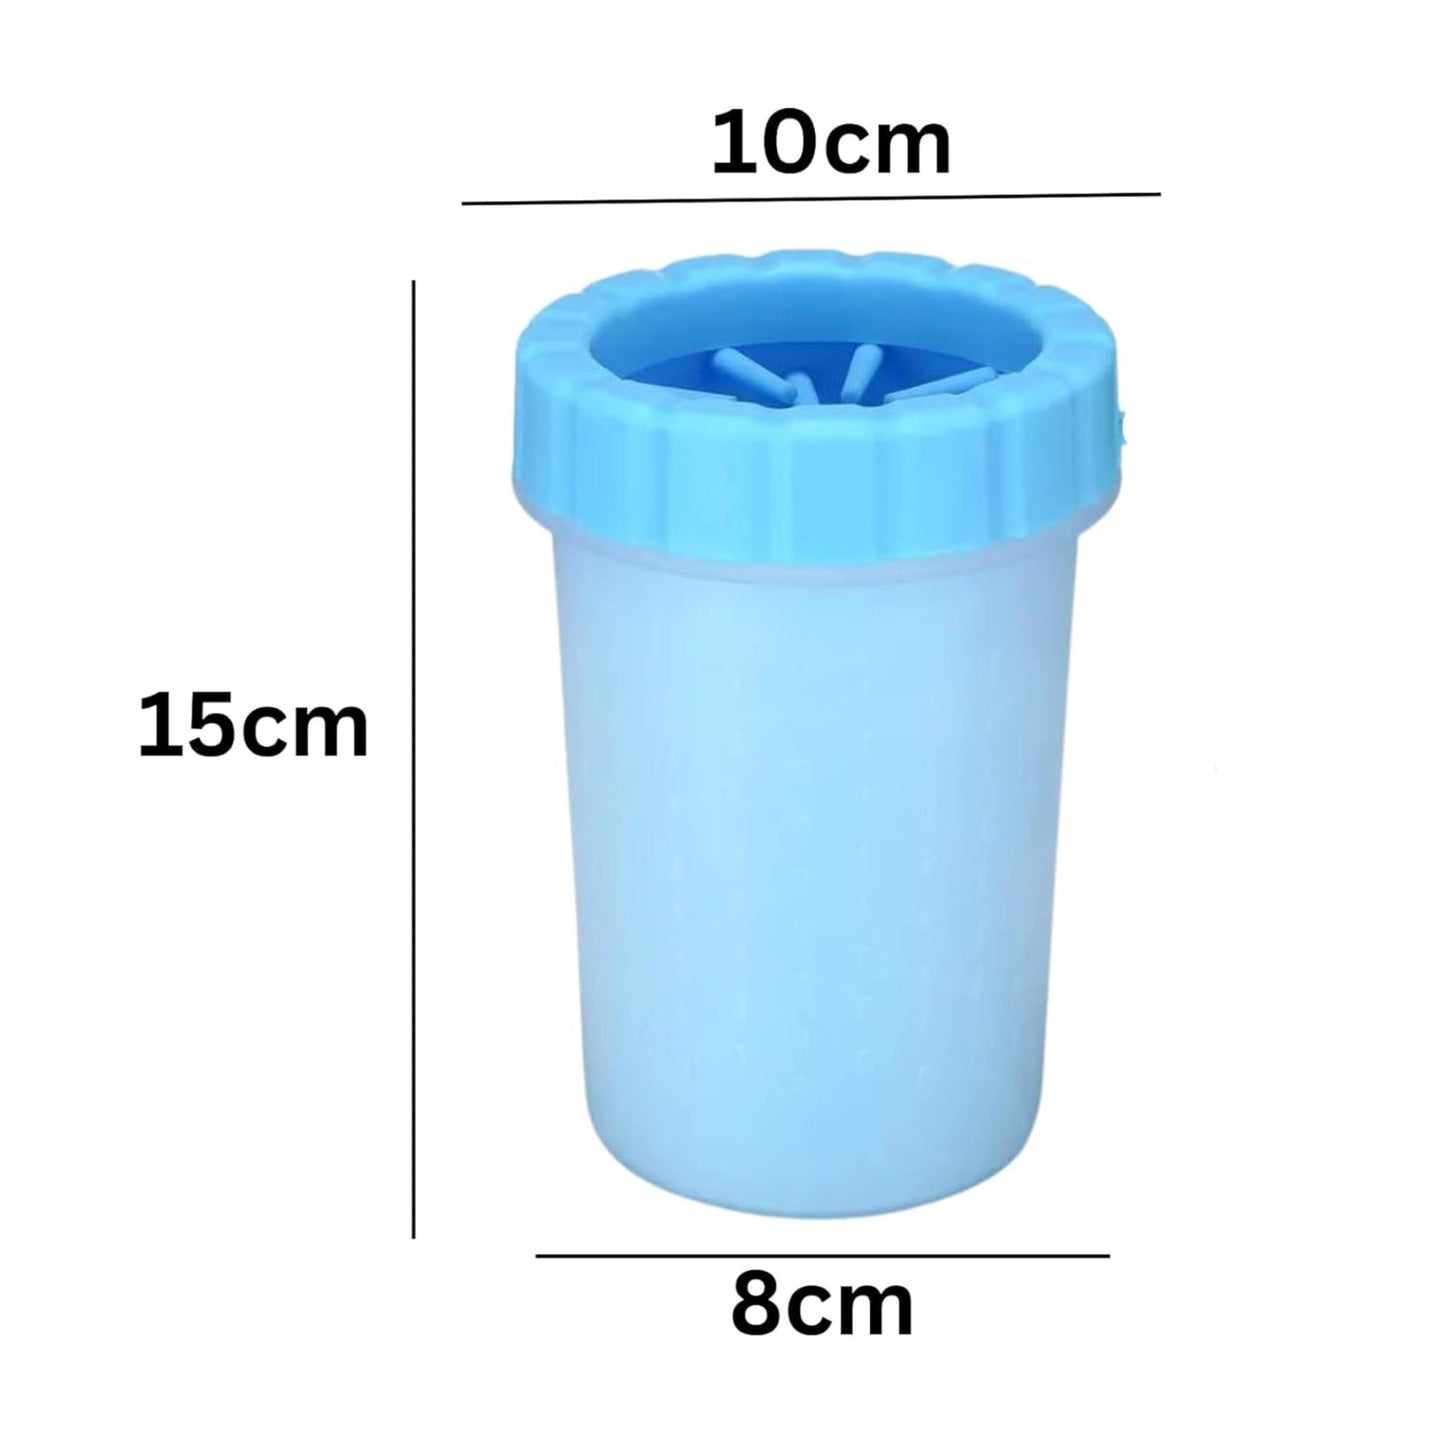 Jenseits Portable Pet Paw Cleaner Cup - Large (Color May Vary)